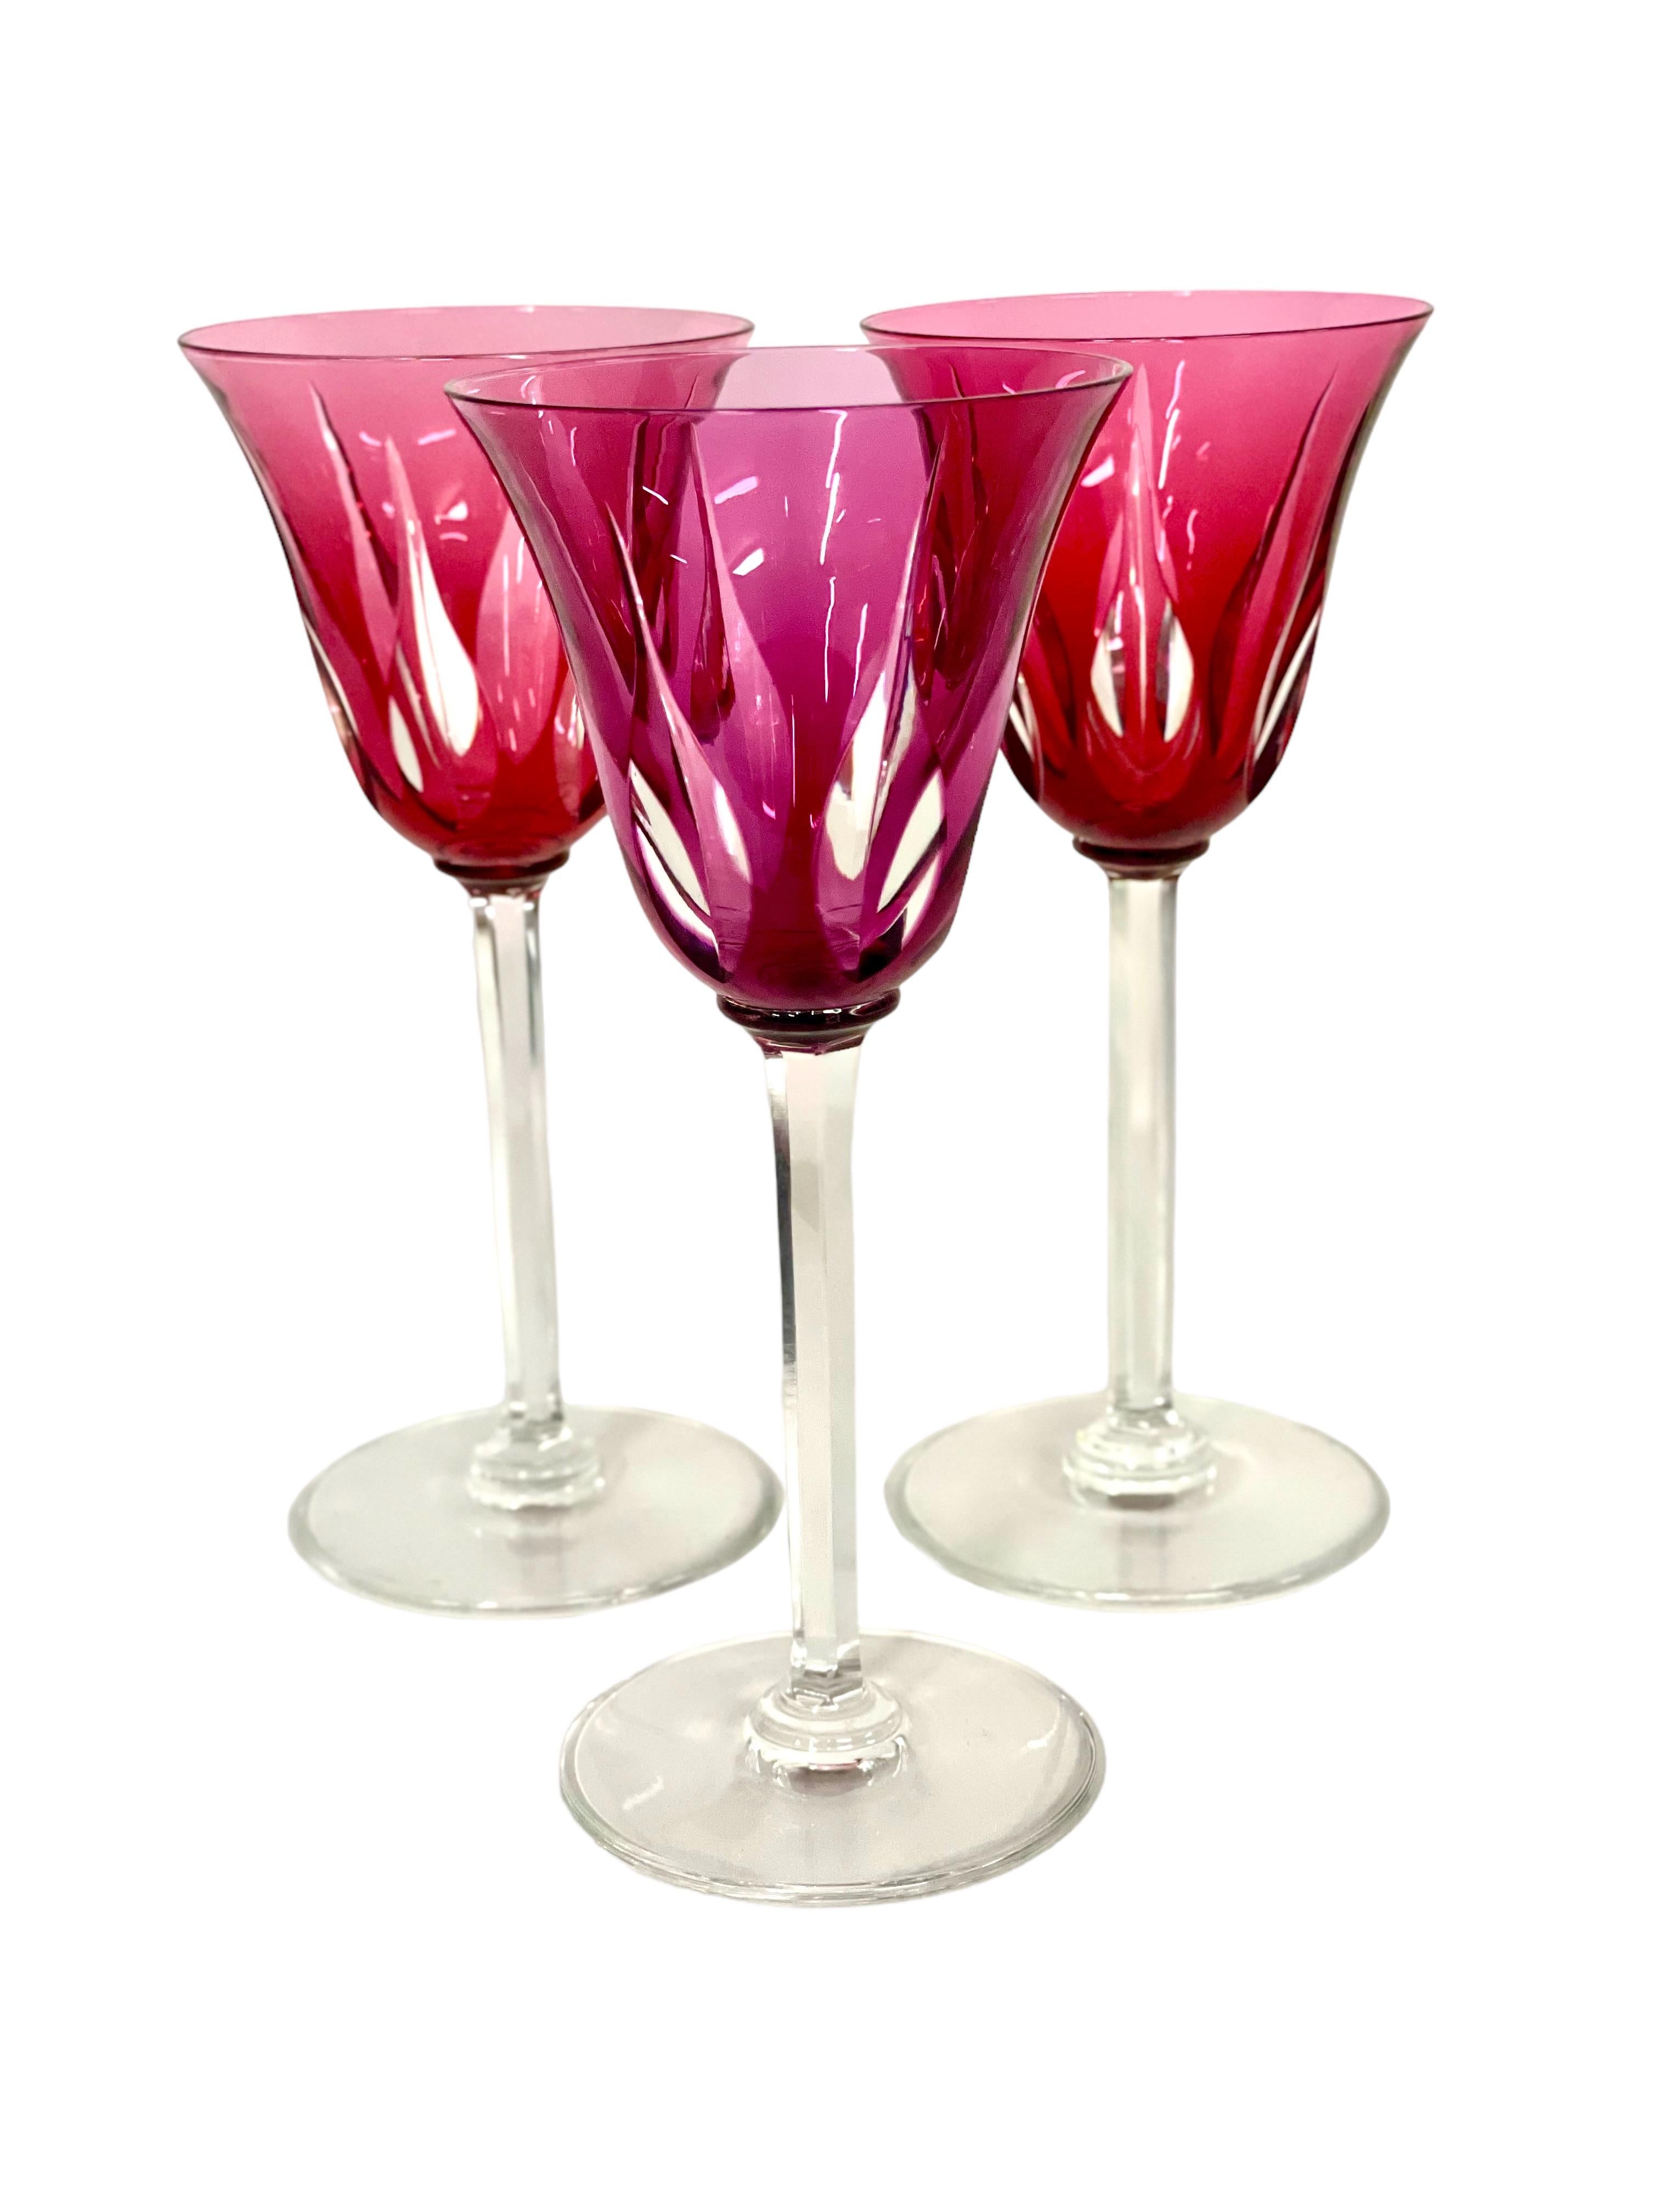 https://a.1stdibscdn.com/set-of-eleven-colourful-saint-louis-crystal-roemer-or-wine-glasses-for-sale-picture-2/f_64192/f_355849421691344545087/Set_of_Eleven_Colourful_Saint_Louis_Crystal_Roemer_or_Wine_Glasses_master.JPG